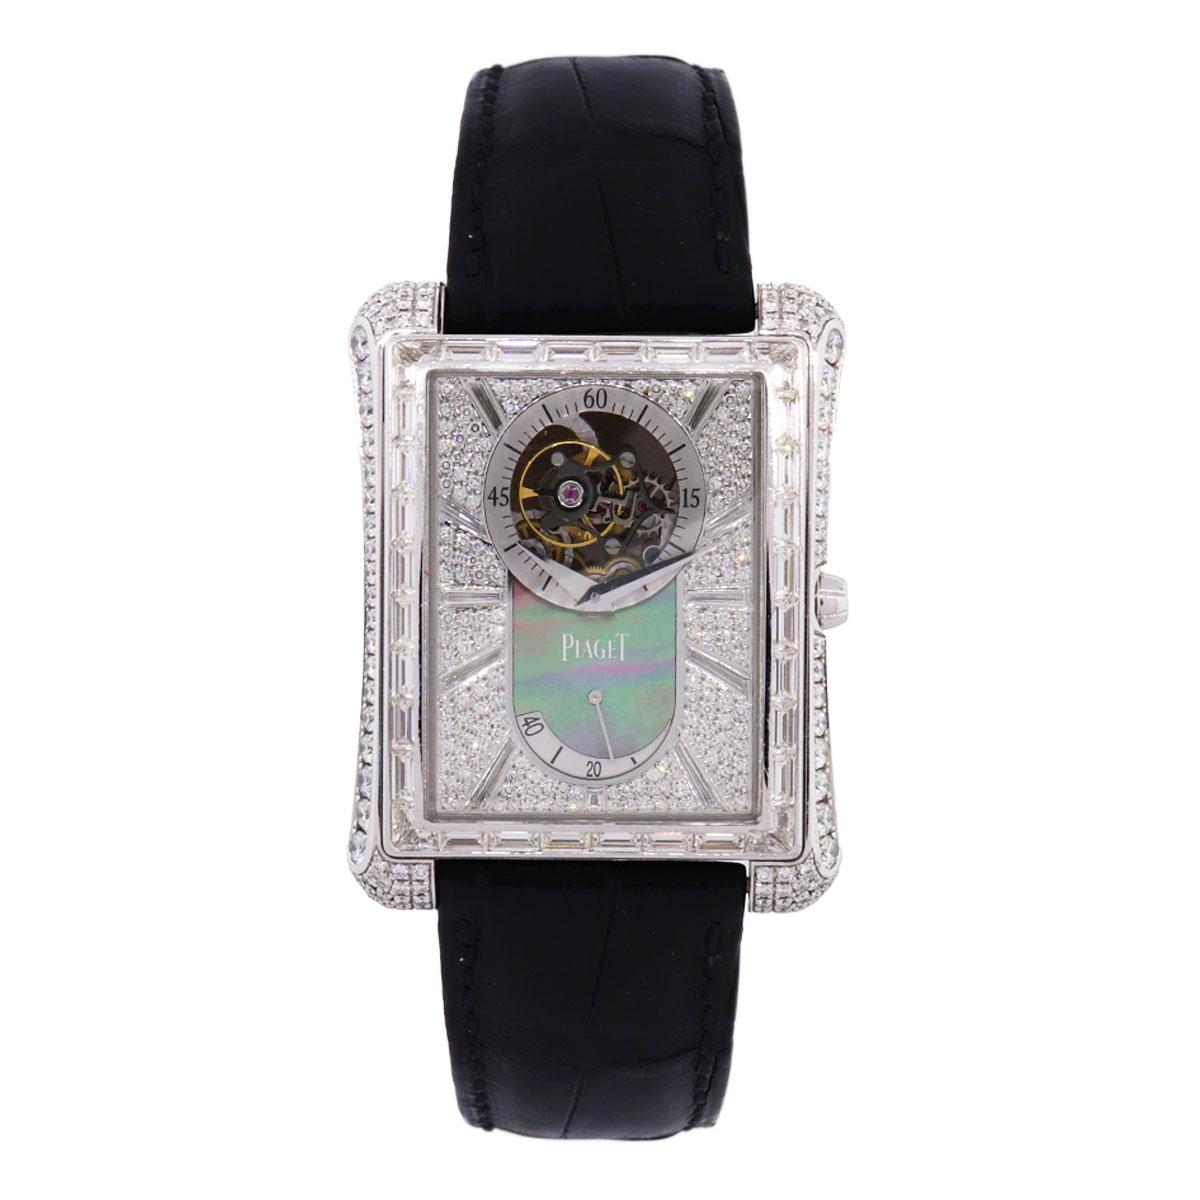 Brand: Piaget
MPN: G0A33078
Model: Emperador
Case Material: 18k White Gold With Facotory Set Round Brilliant and Baguette shaped Diamonds
Case Diameter: 36mm x 46mm
Crystal: Scratch resistant sapphire
Bezel: Factory Diamond bezel
Dial: Factory